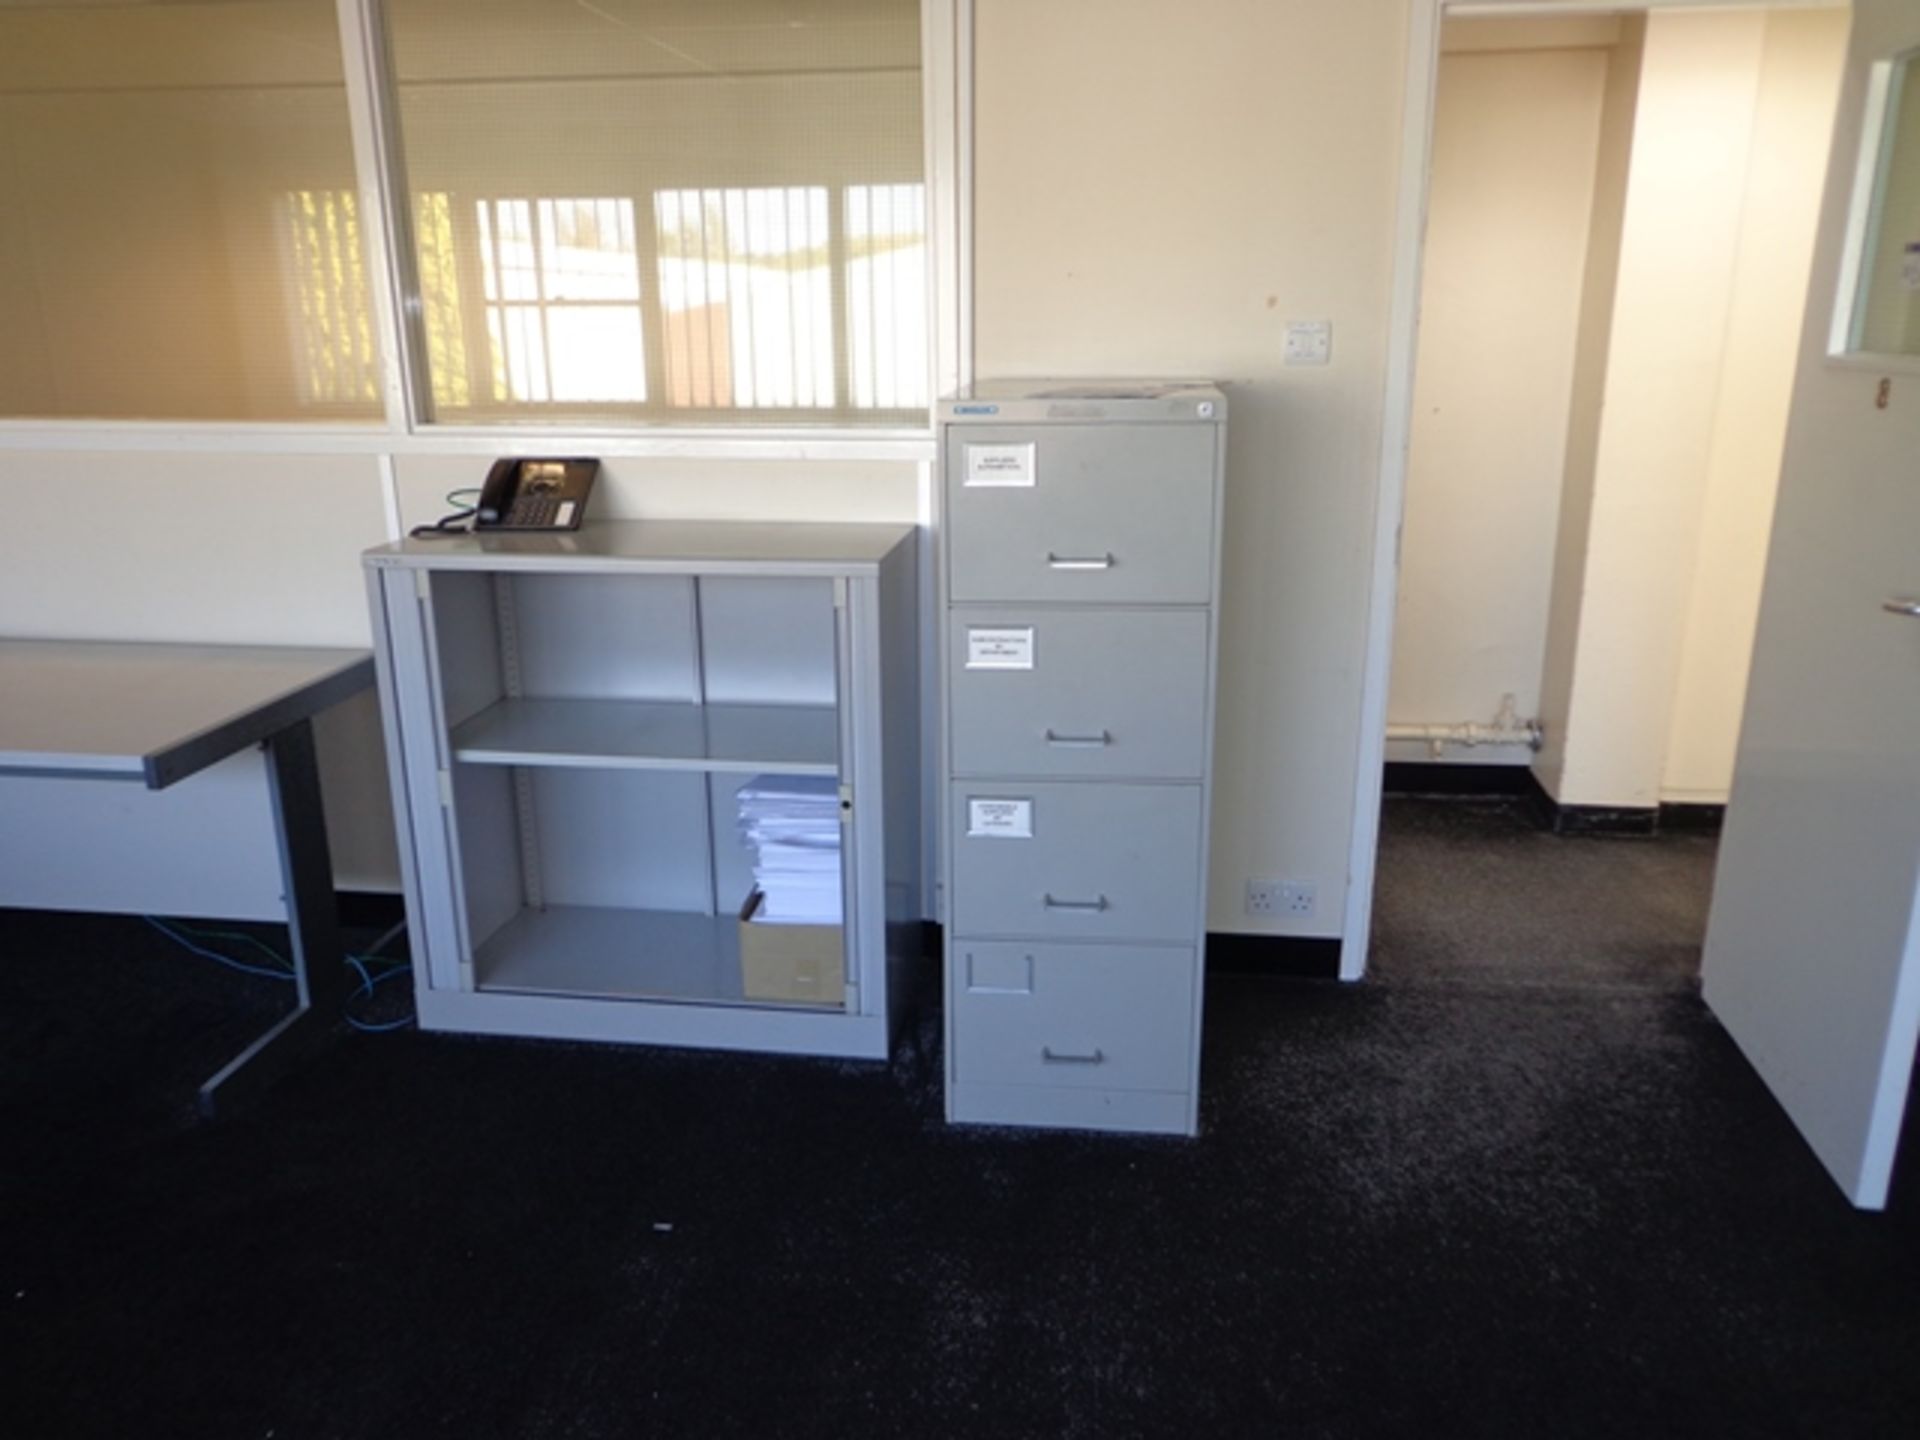 Contents to Office inc Five Grey Melamine Desks, Two Pedestals, Four Drawer Filing Cabinets, Two - Image 2 of 3